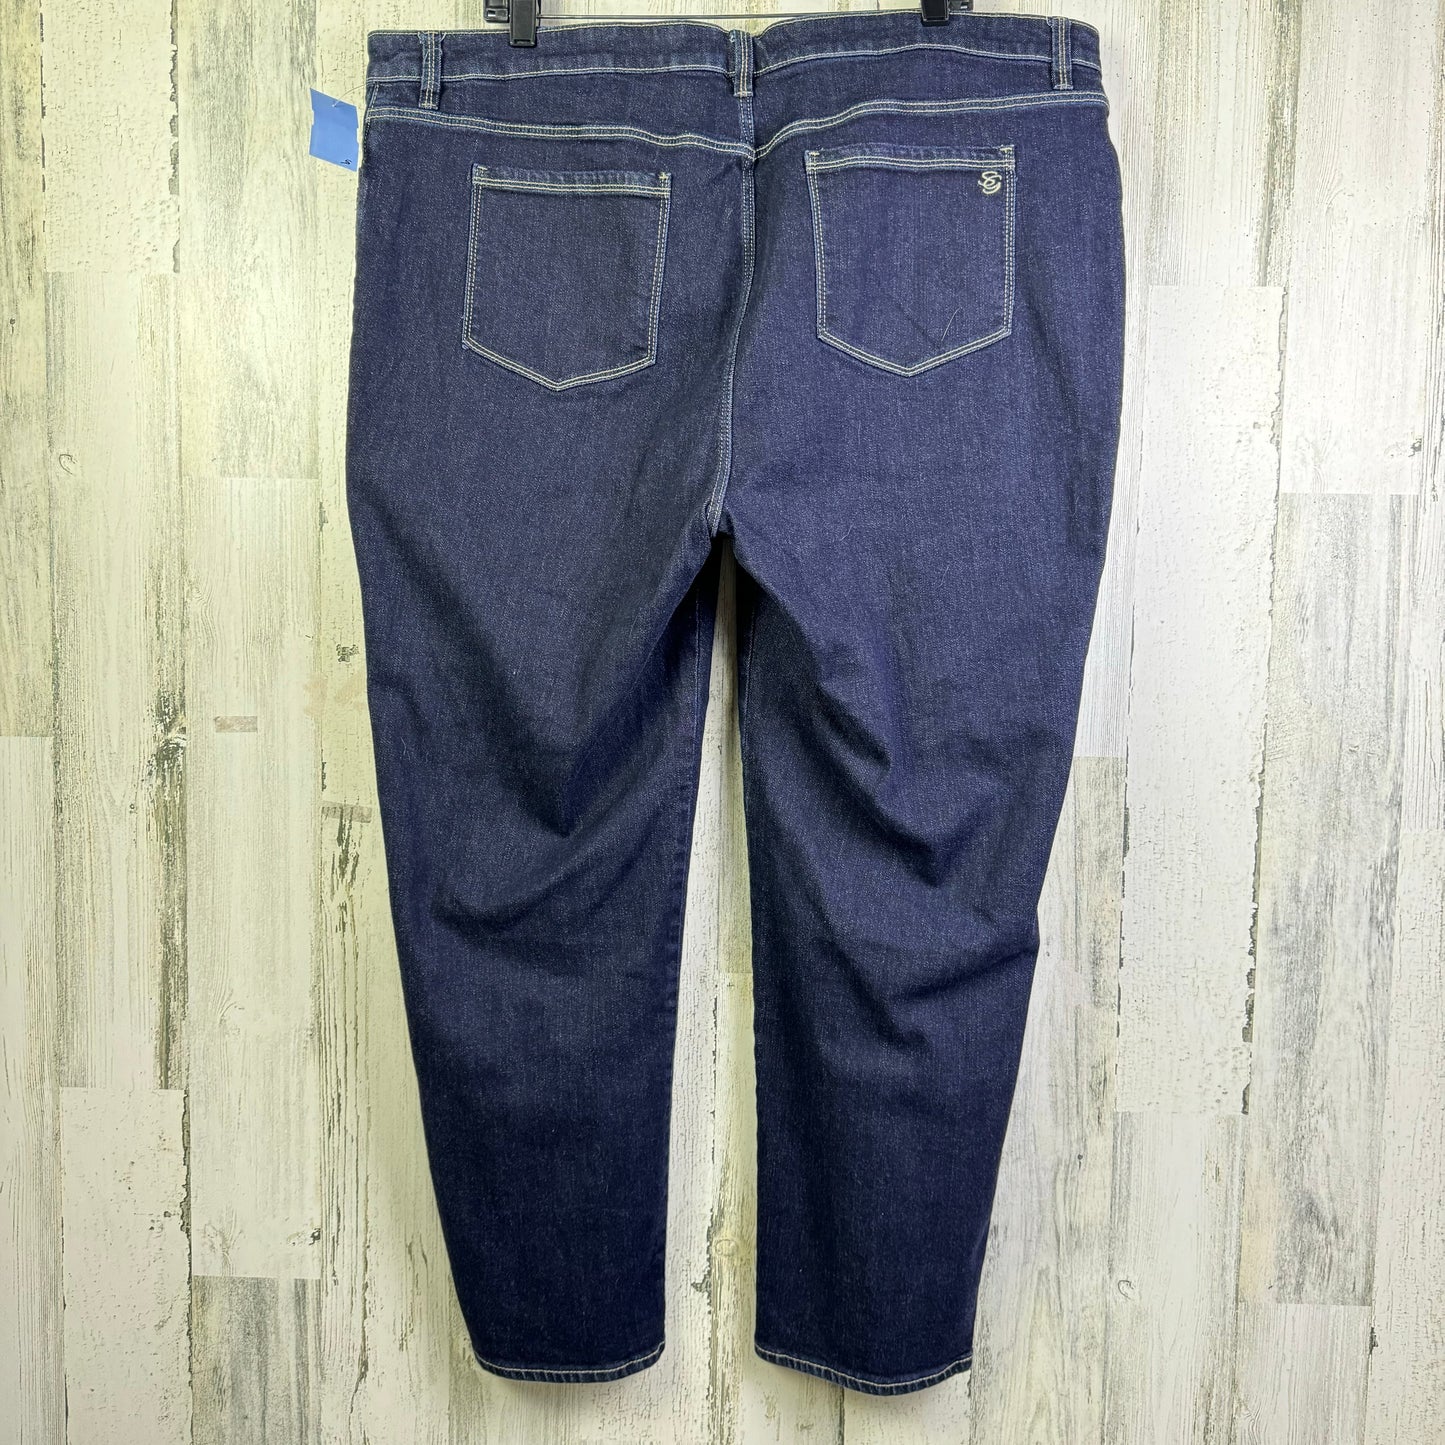 Jeans Straight By Susan Graver  Size: 22